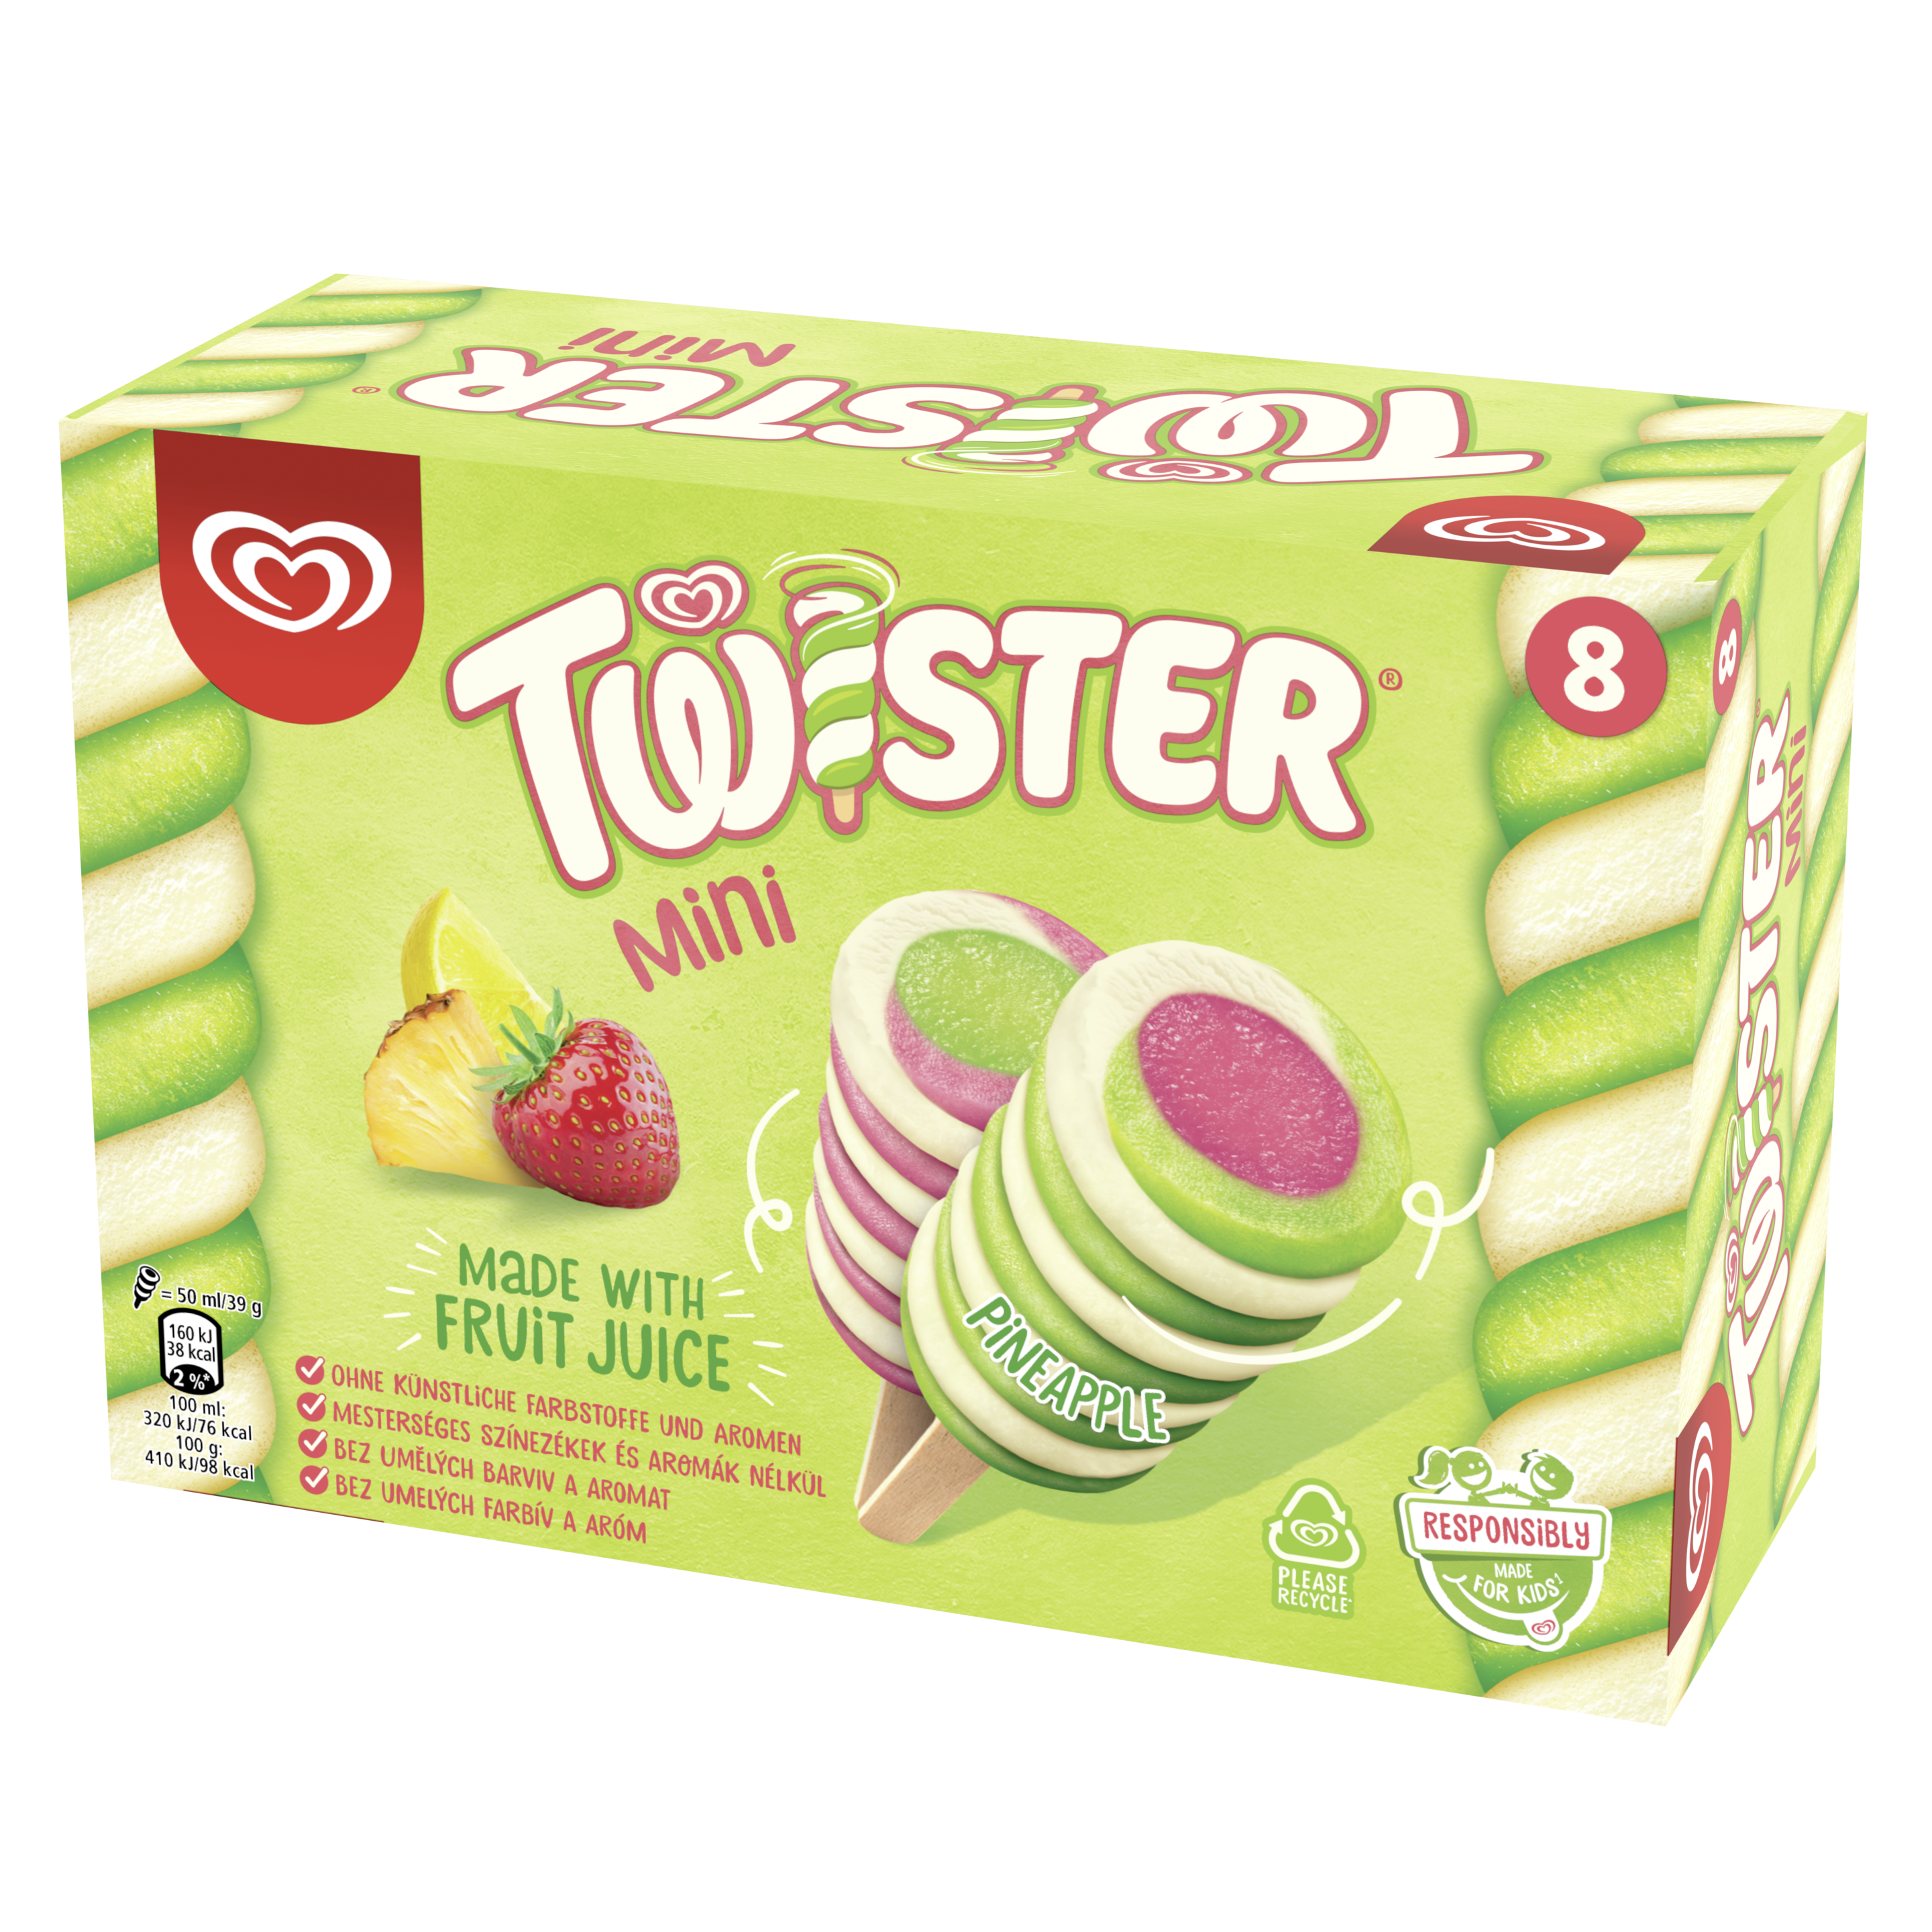 Twister multipack